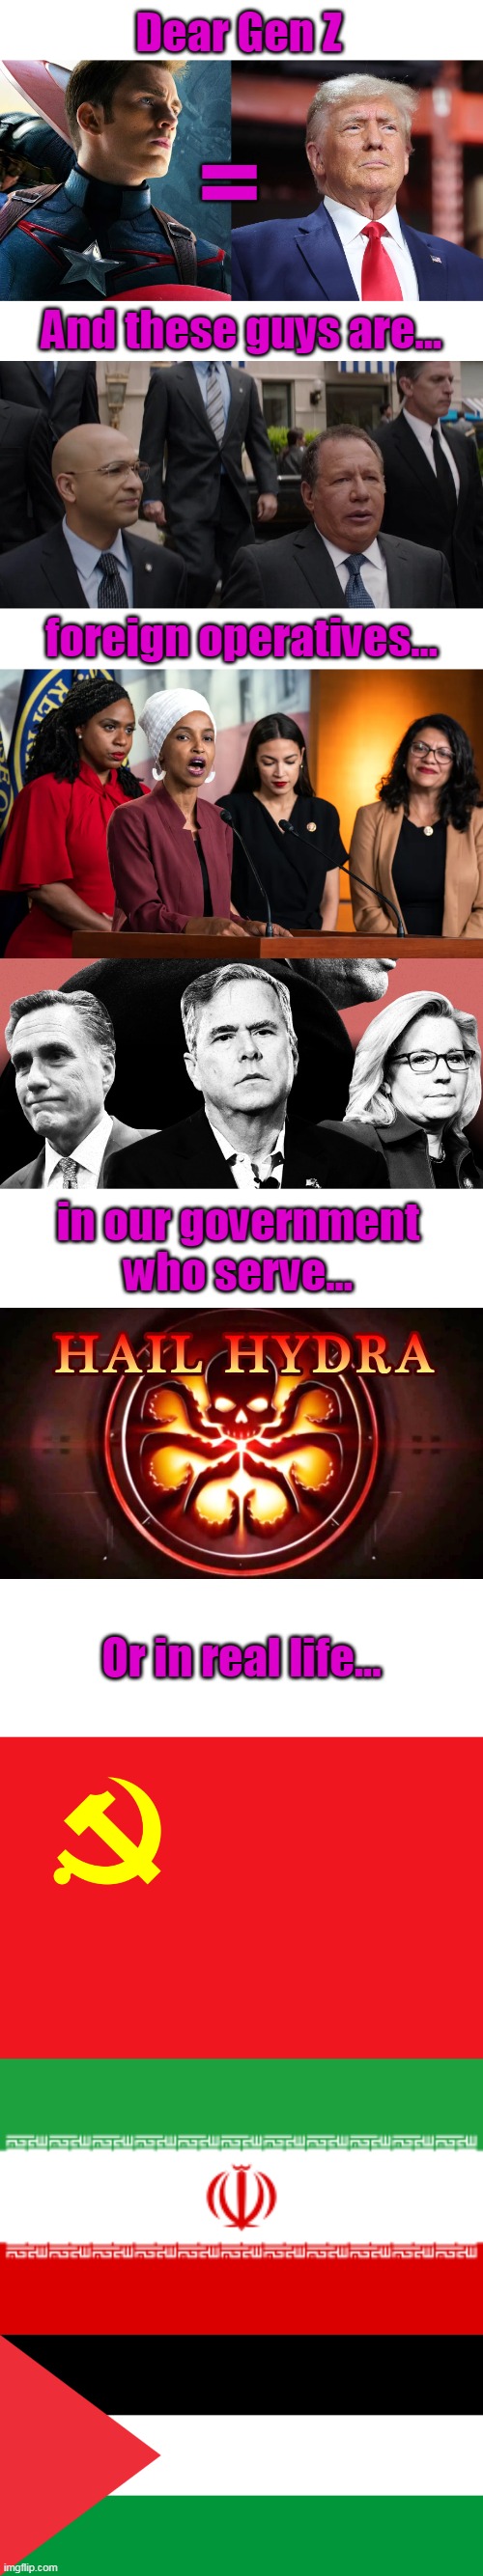 How to talk to this generation (I even used purple!) | Dear Gen Z; =; And these guys are... foreign operatives... in our government who serve... Or in real life... | image tagged in captain america,hydra,squad,rino,trump,fascism | made w/ Imgflip meme maker